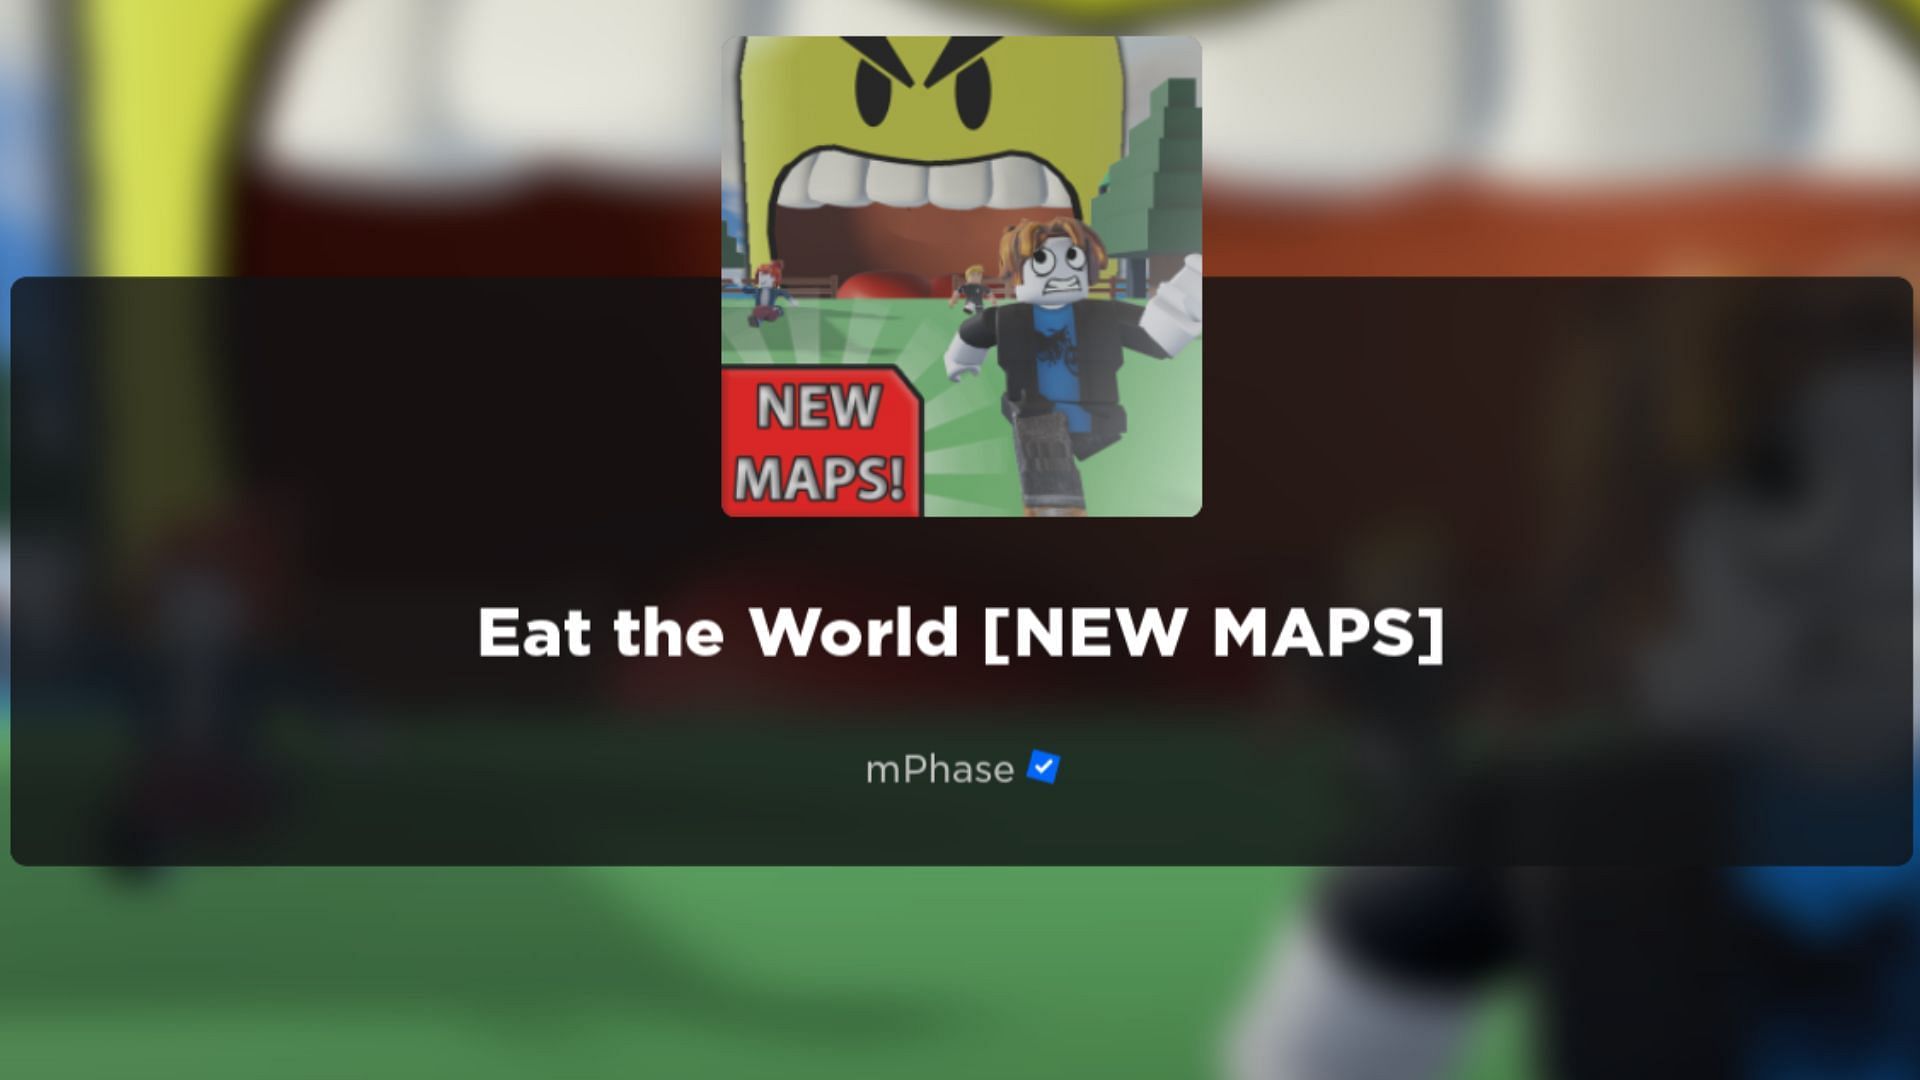 Use the guide to become the best in Eat the World